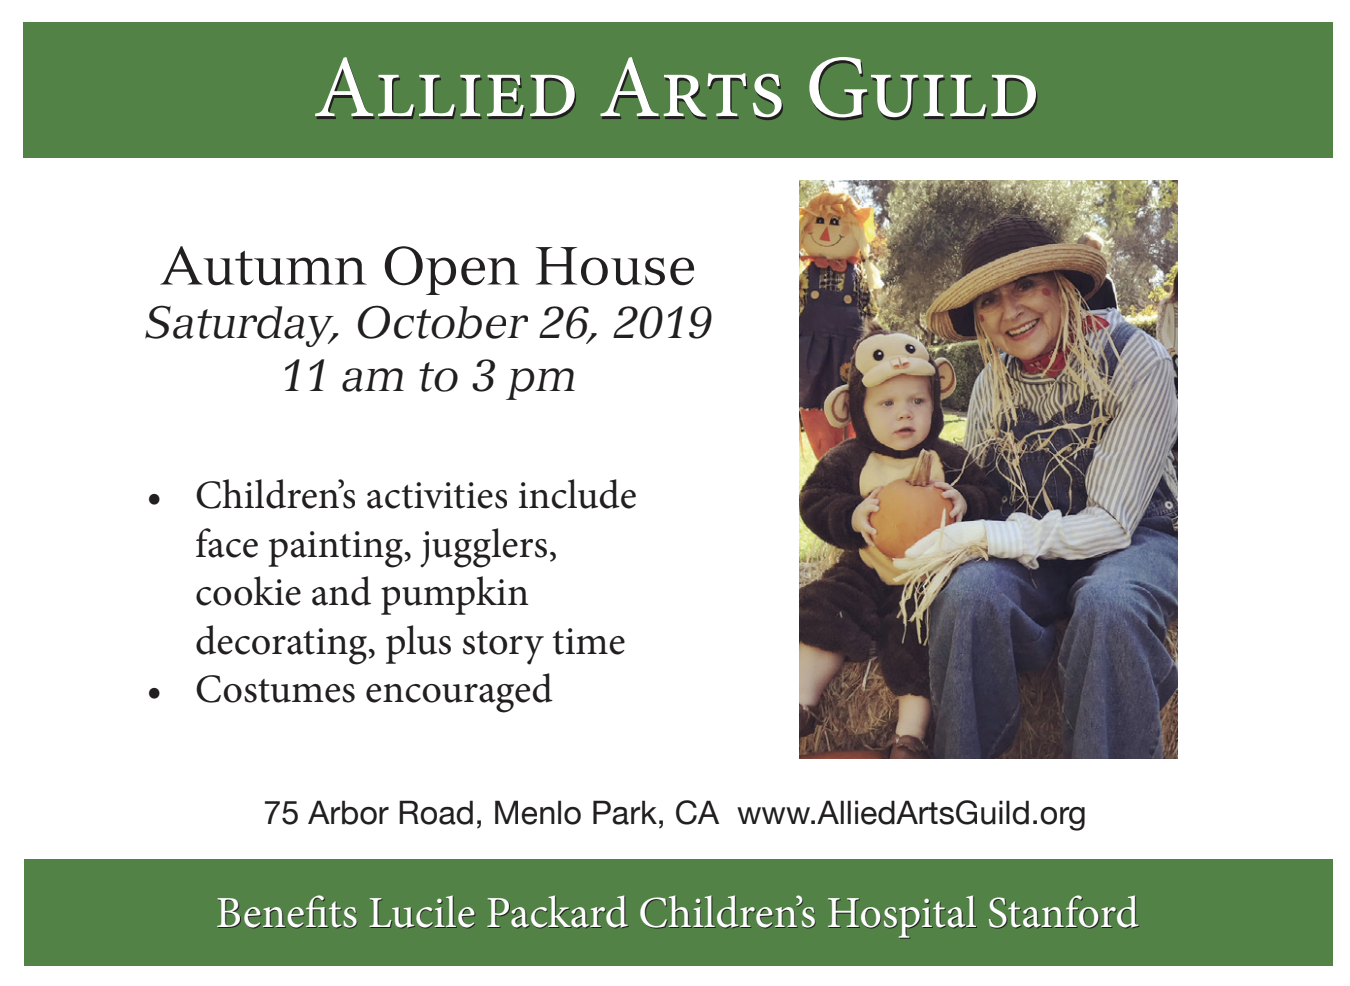 Autumn Open House at Allied Arts Guild in Menlo Park